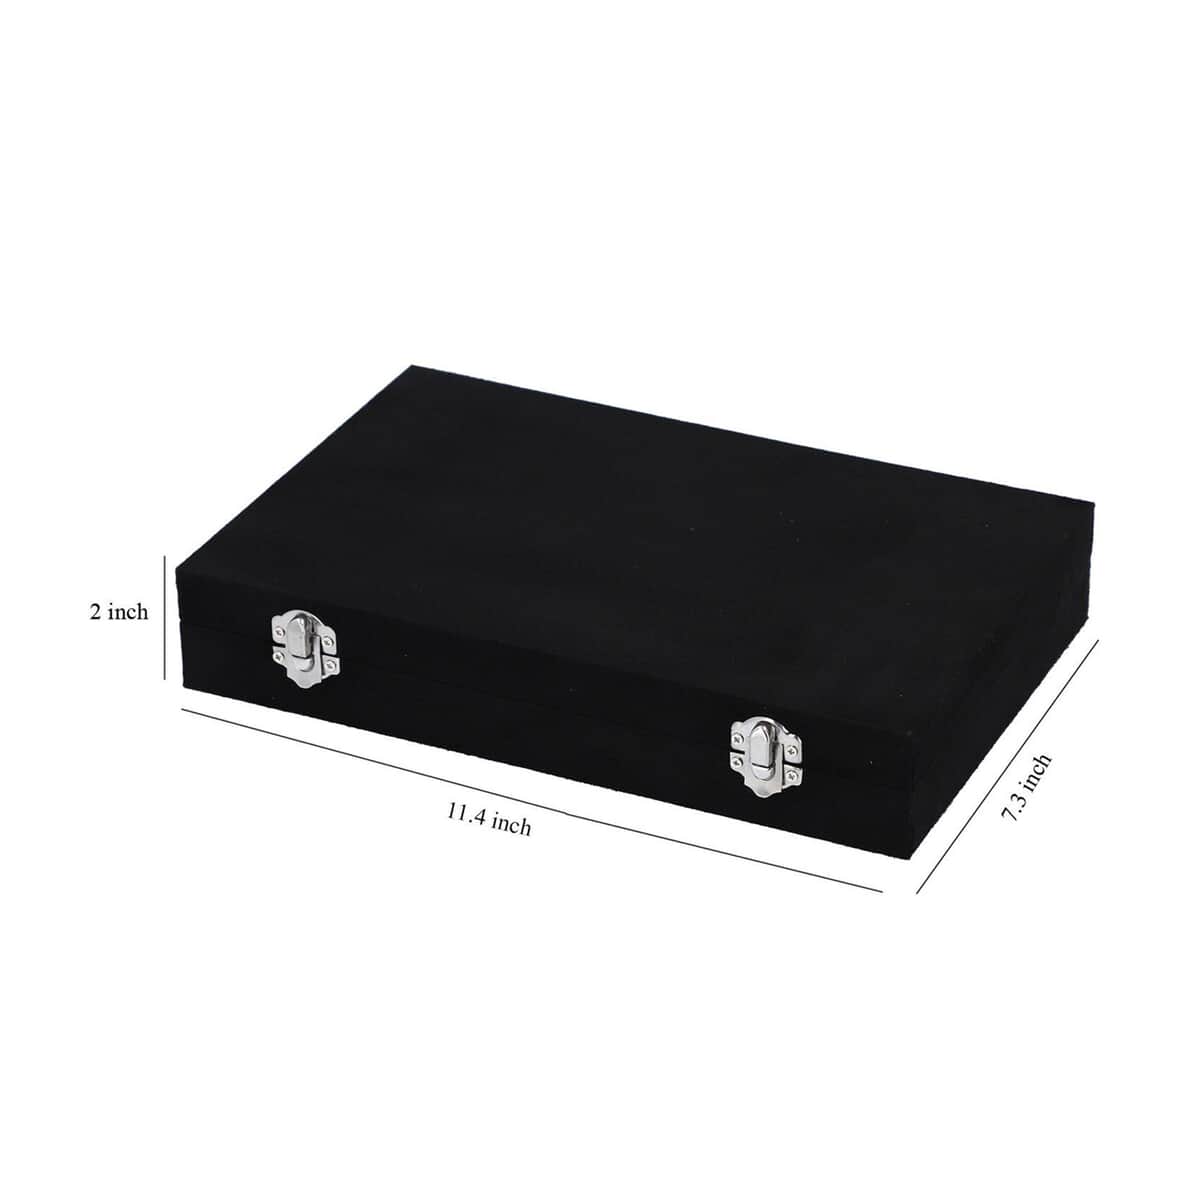 Black Velvet Jewelry Box with Anti Tarnish Lining & Lock (8 Necklace Hooks, 8 Earrings/Pendant Sections and Approx 10 Rings Slots) (11.4"x7.3"x2") image number 4